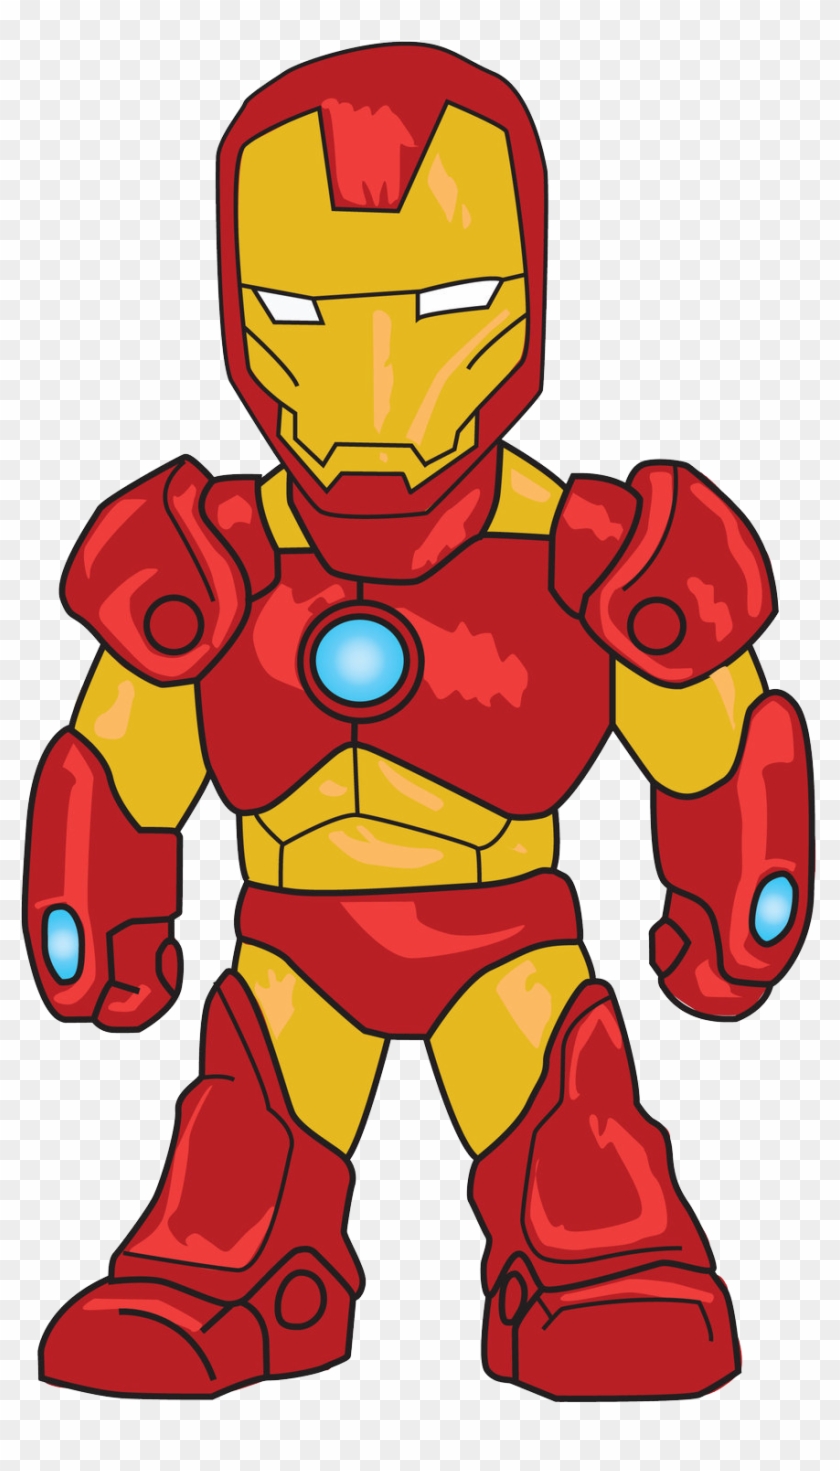 Iron Man Cartoon Drawing Free Transparent PNG Clipart Images Download